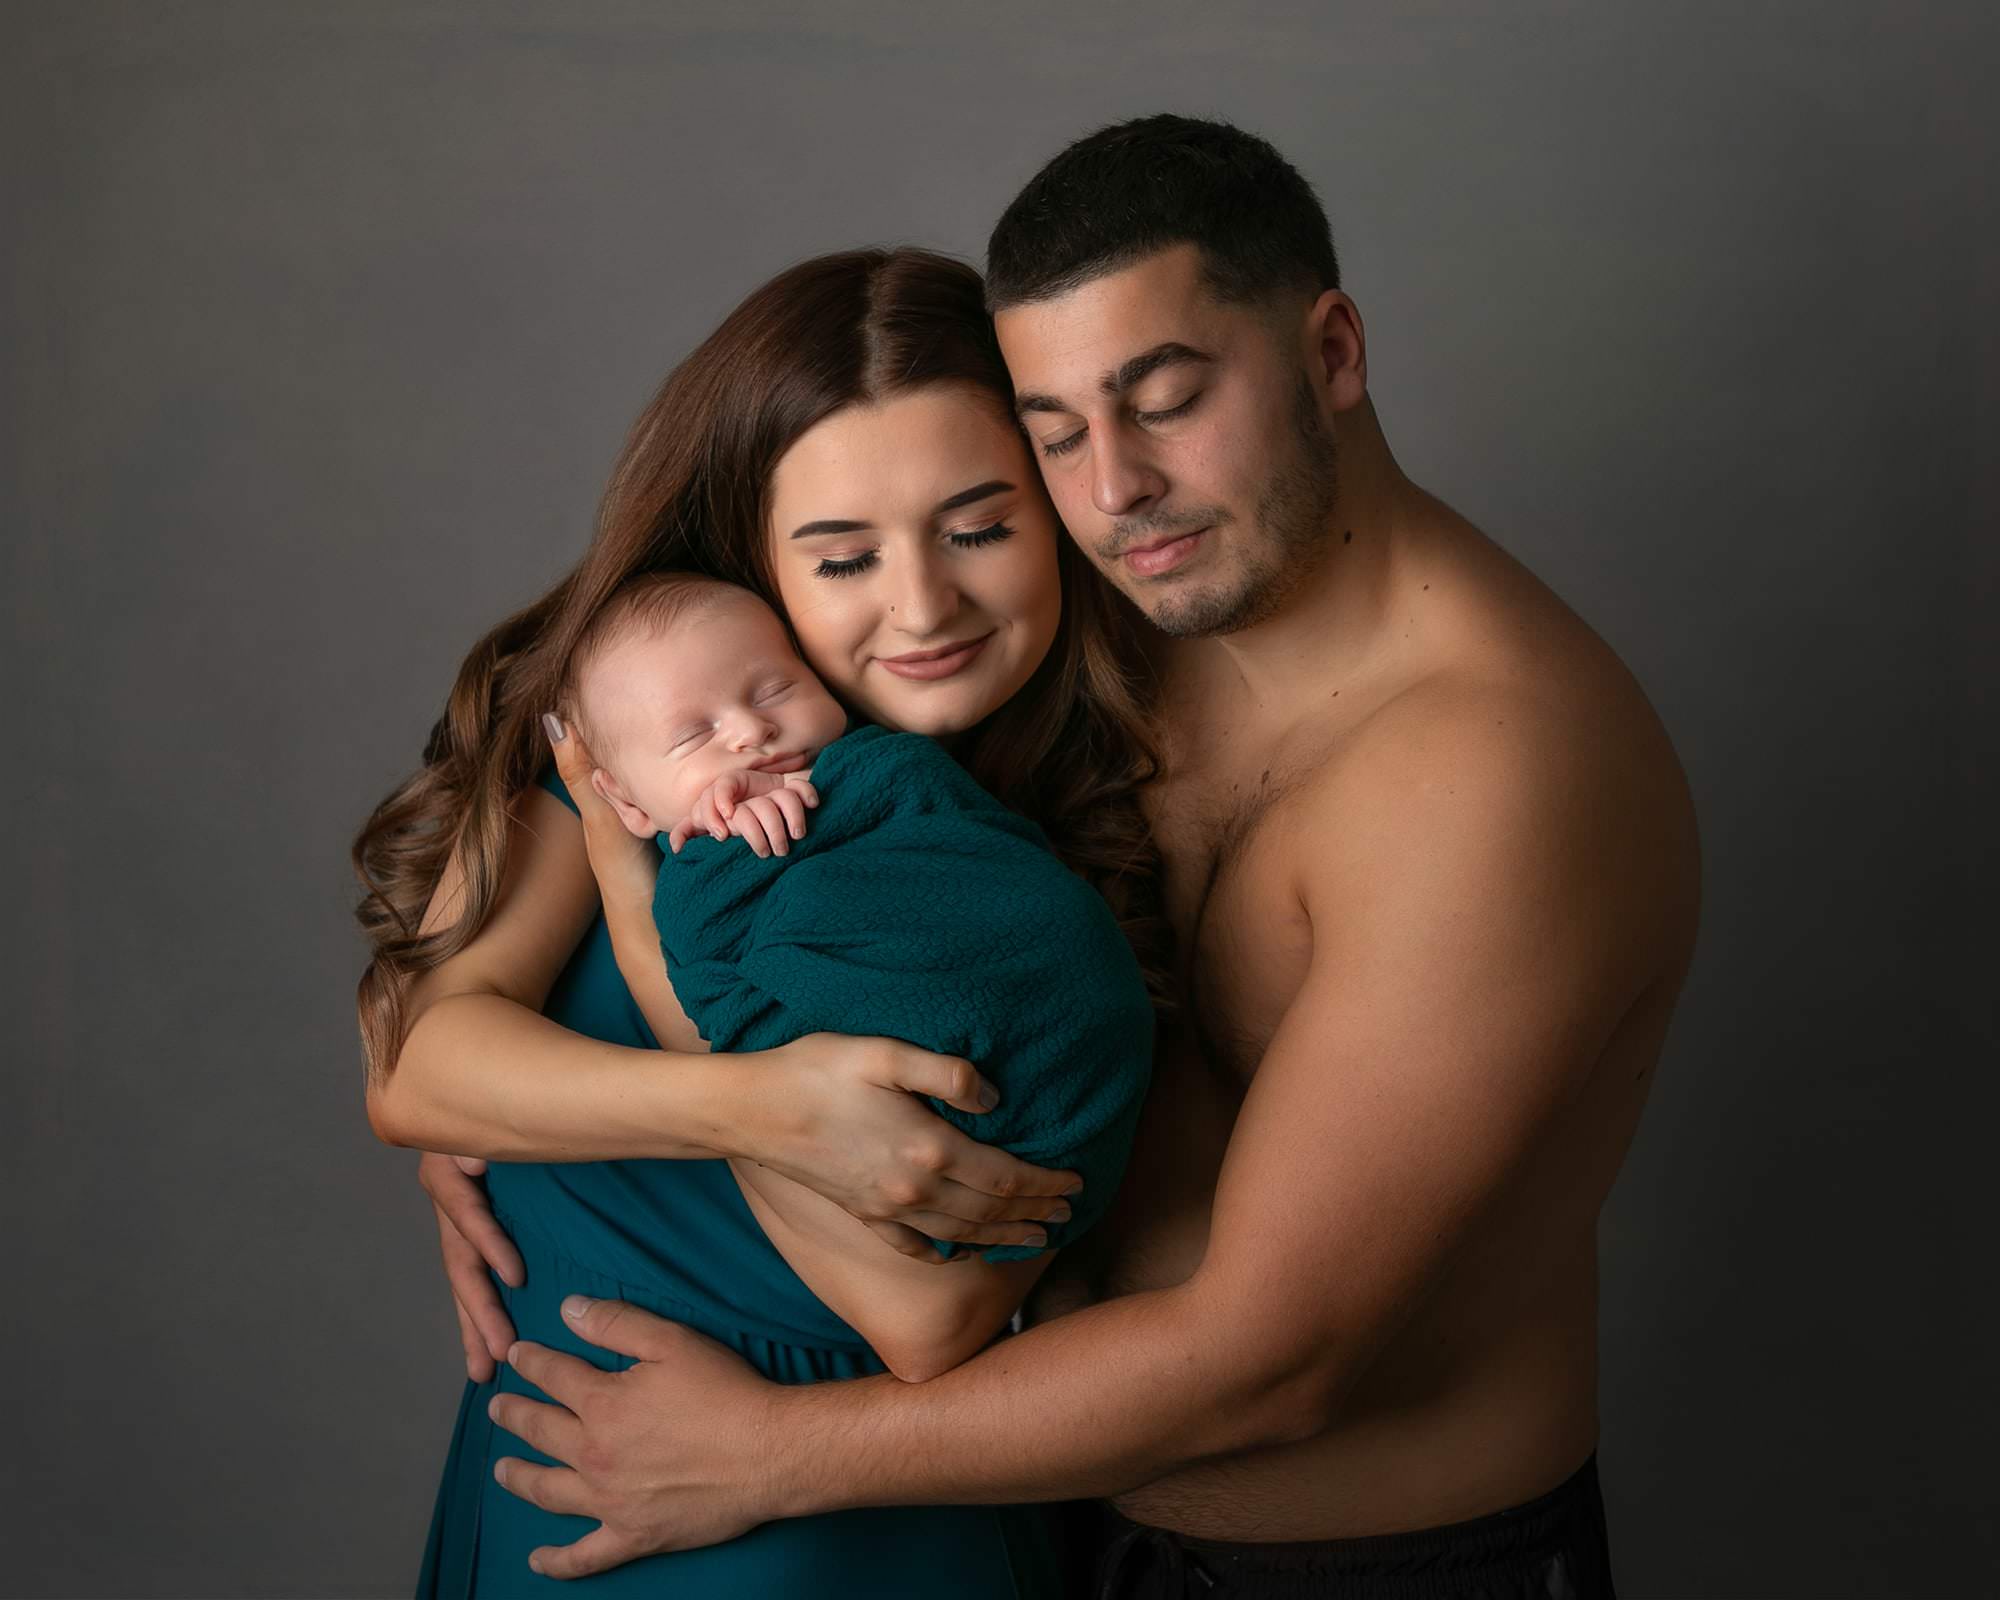 Young male topless, with arm around young girl with long wavy hair. Girl is wearing a green dress holding a baby wrapped in green. Both have their eyes closed. Image taken by Glasgow baby photographer